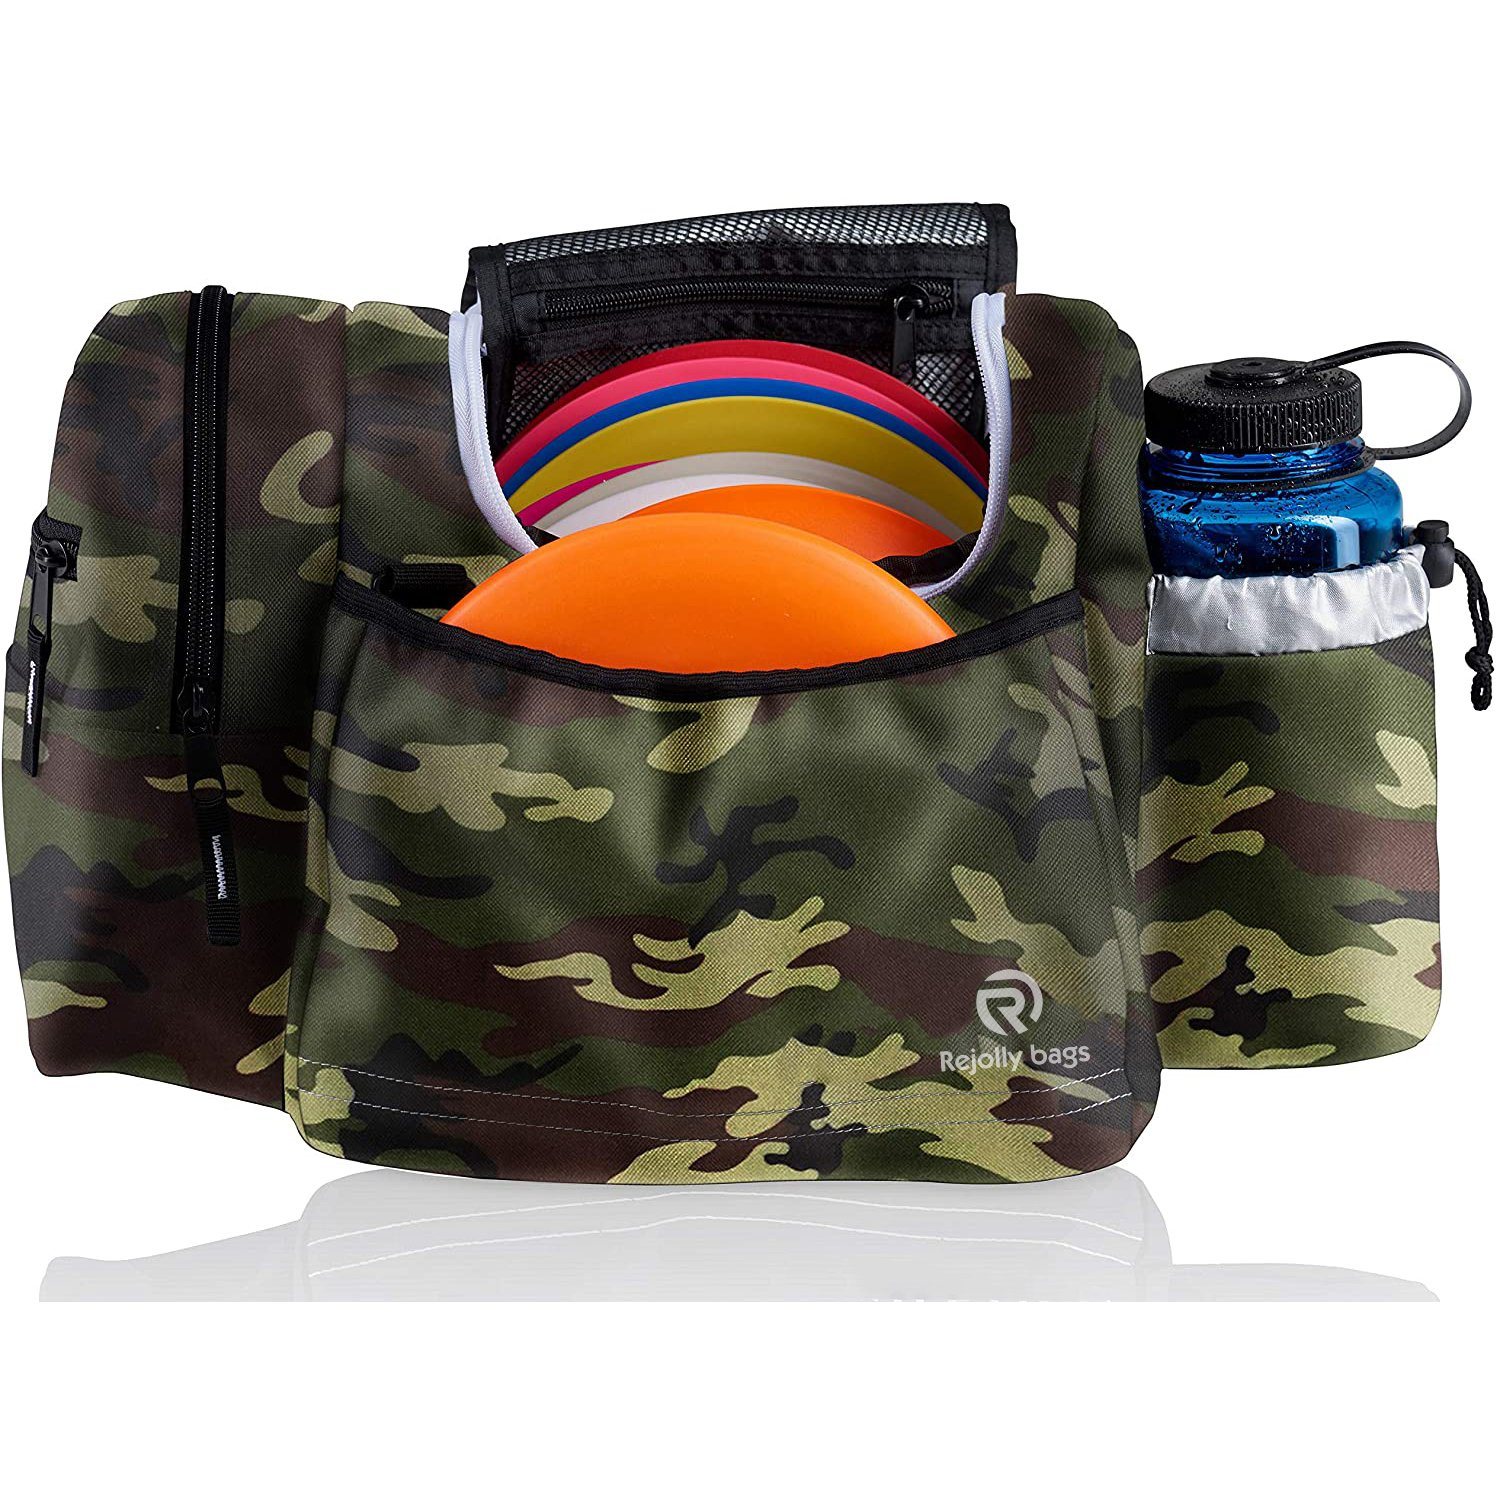 Large Capacity Holds 10-14 Discs Water Bottle and Accessories Disc Golf Bag